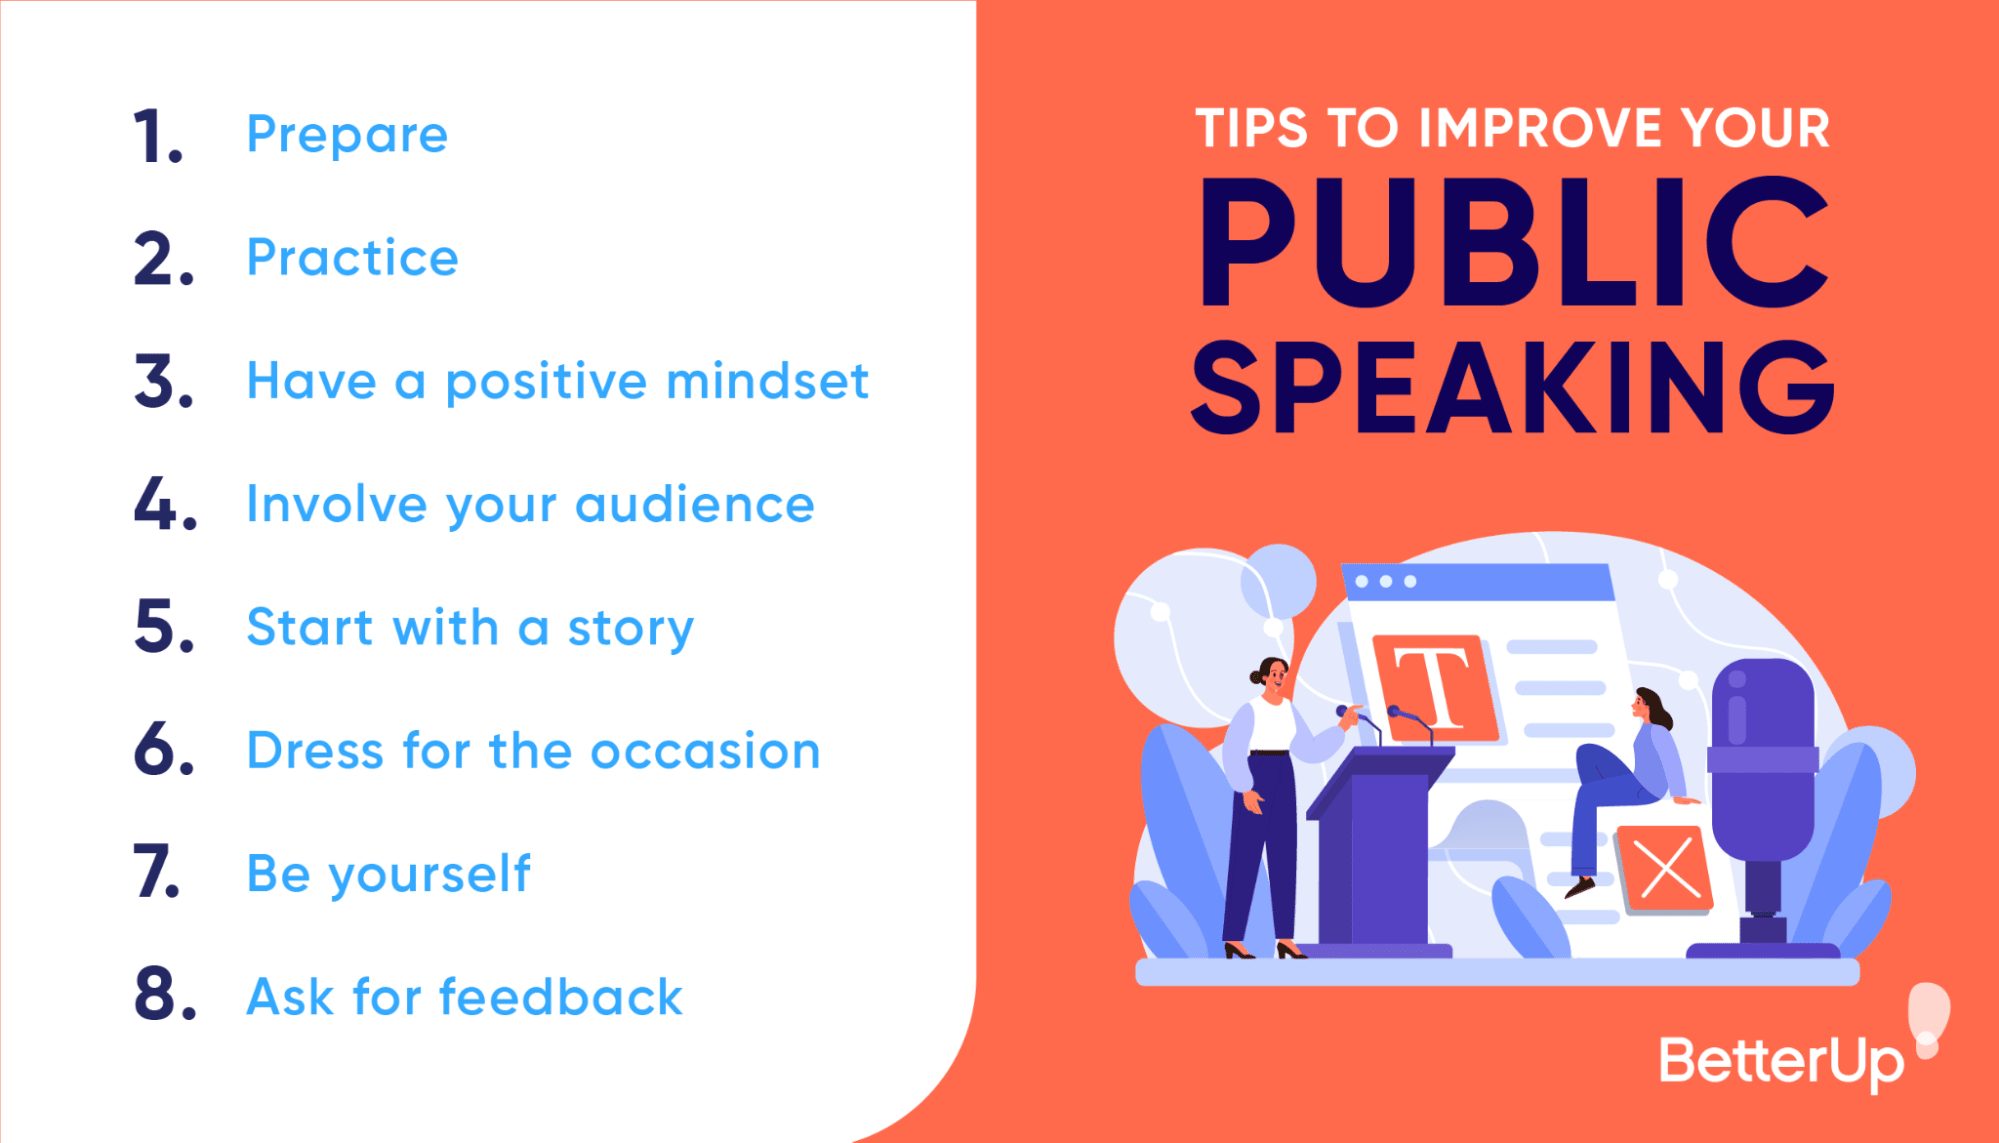 A list of 8 tips to improve public speaking skills